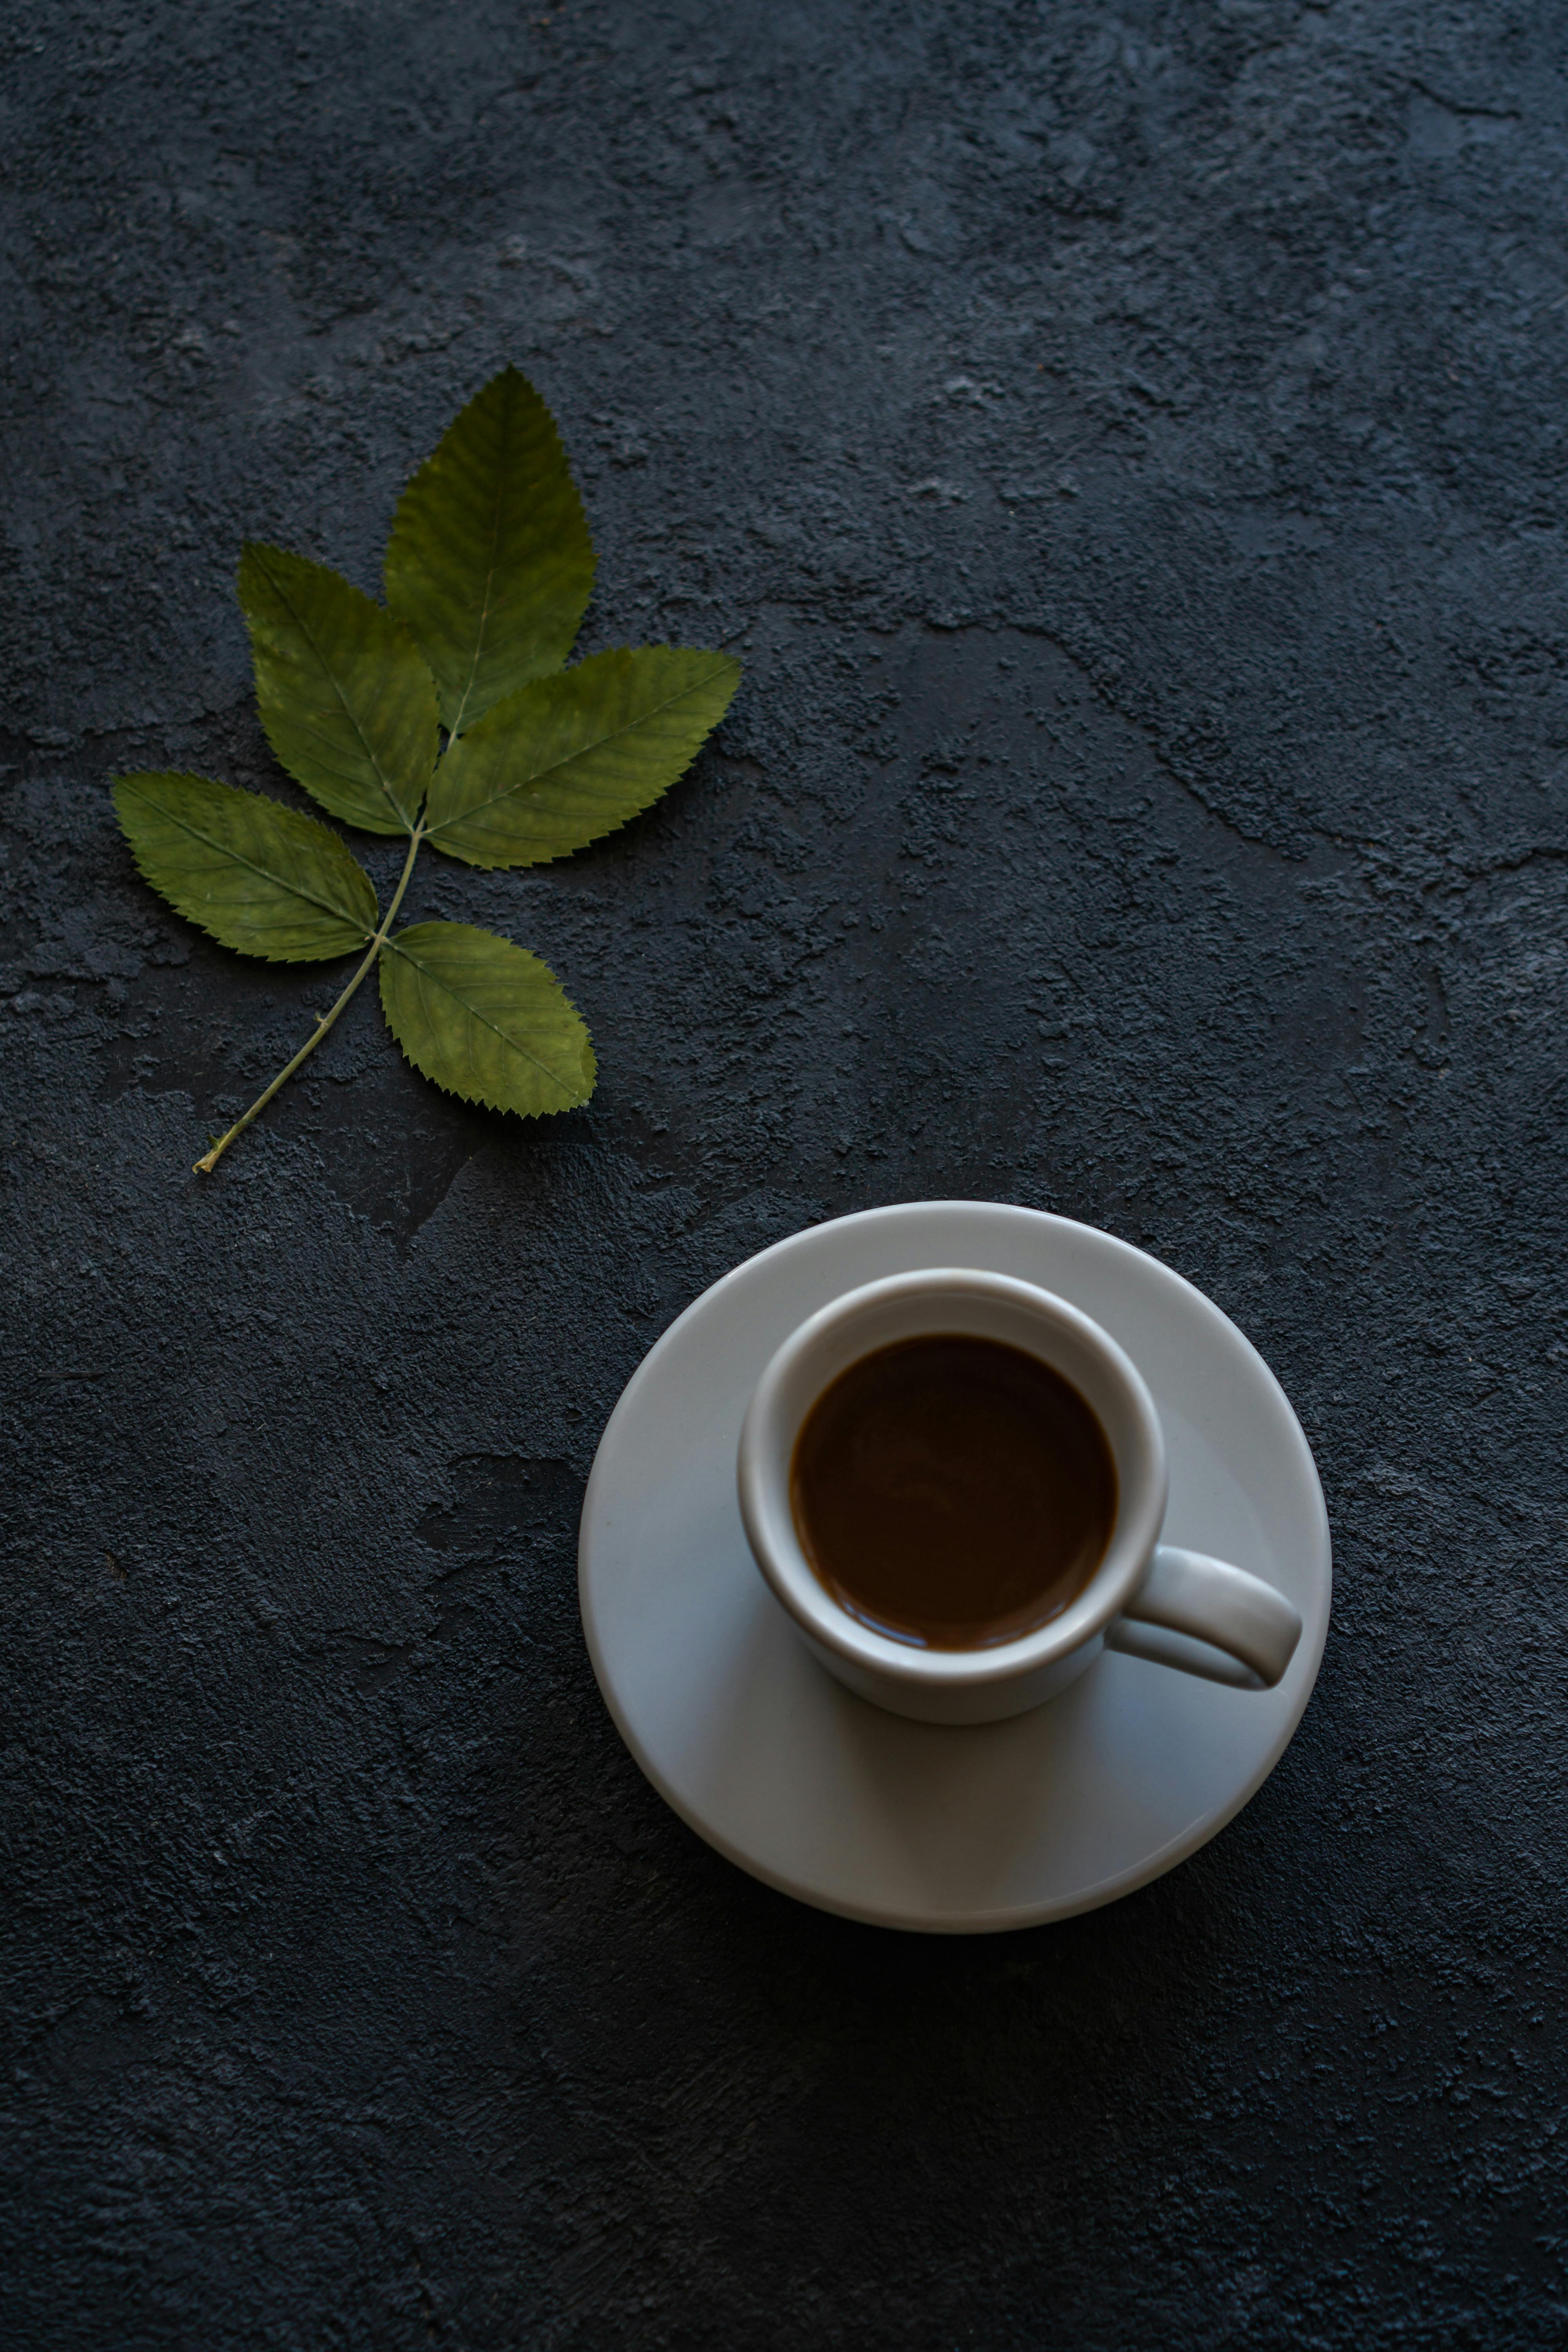 White ceramic cup on brown wooden tray photo – Free Coffee cup Image on  Unsplash